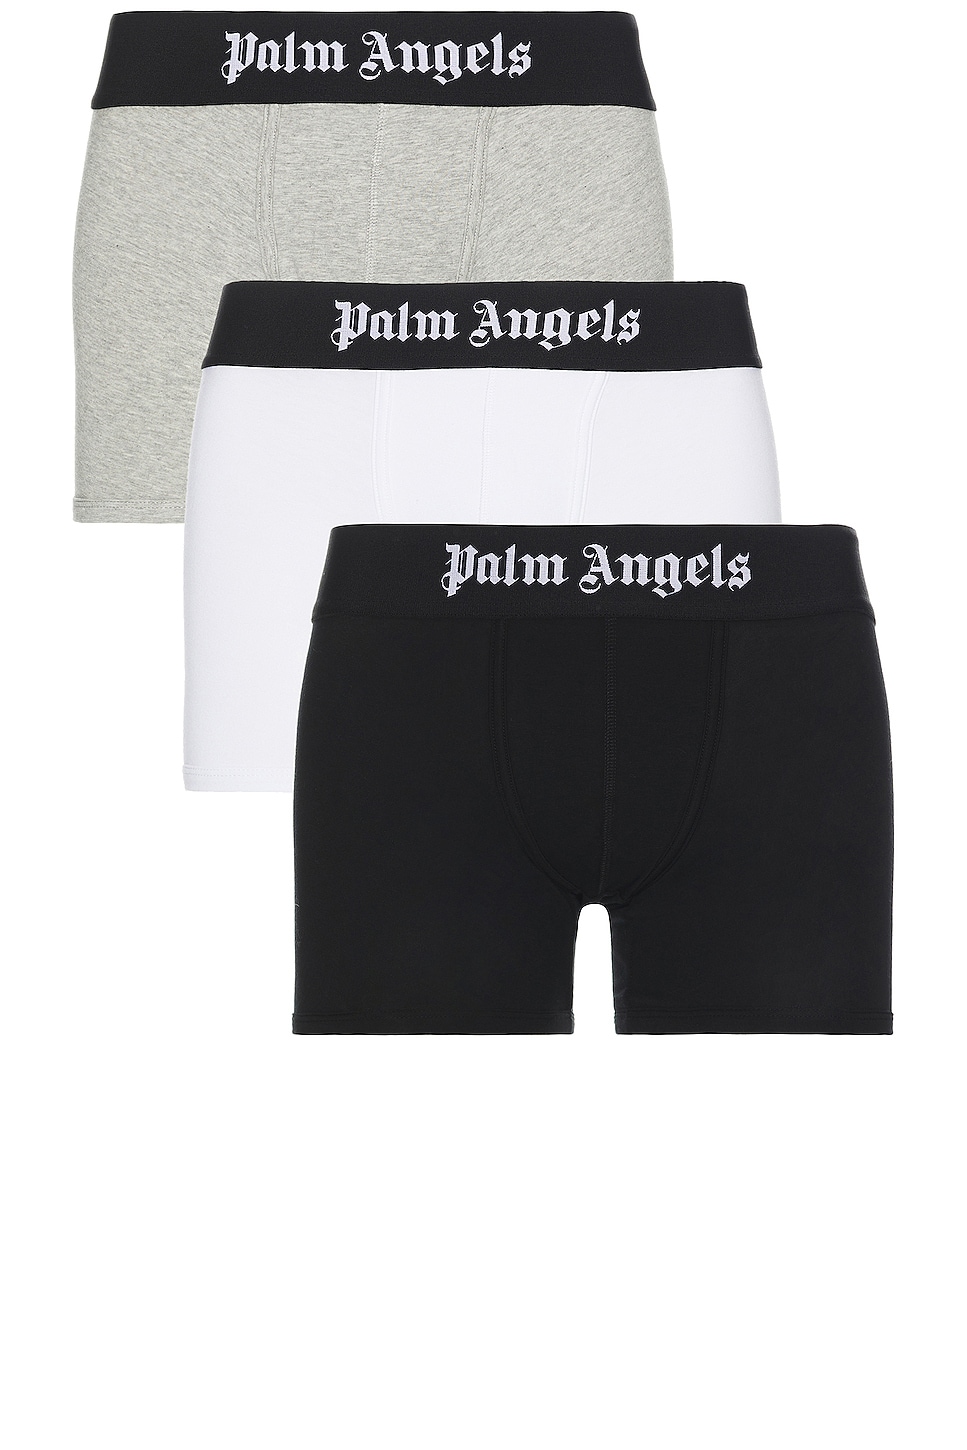 Image 1 of Palm Angels Bwg Boxers Tri Pack in Multi